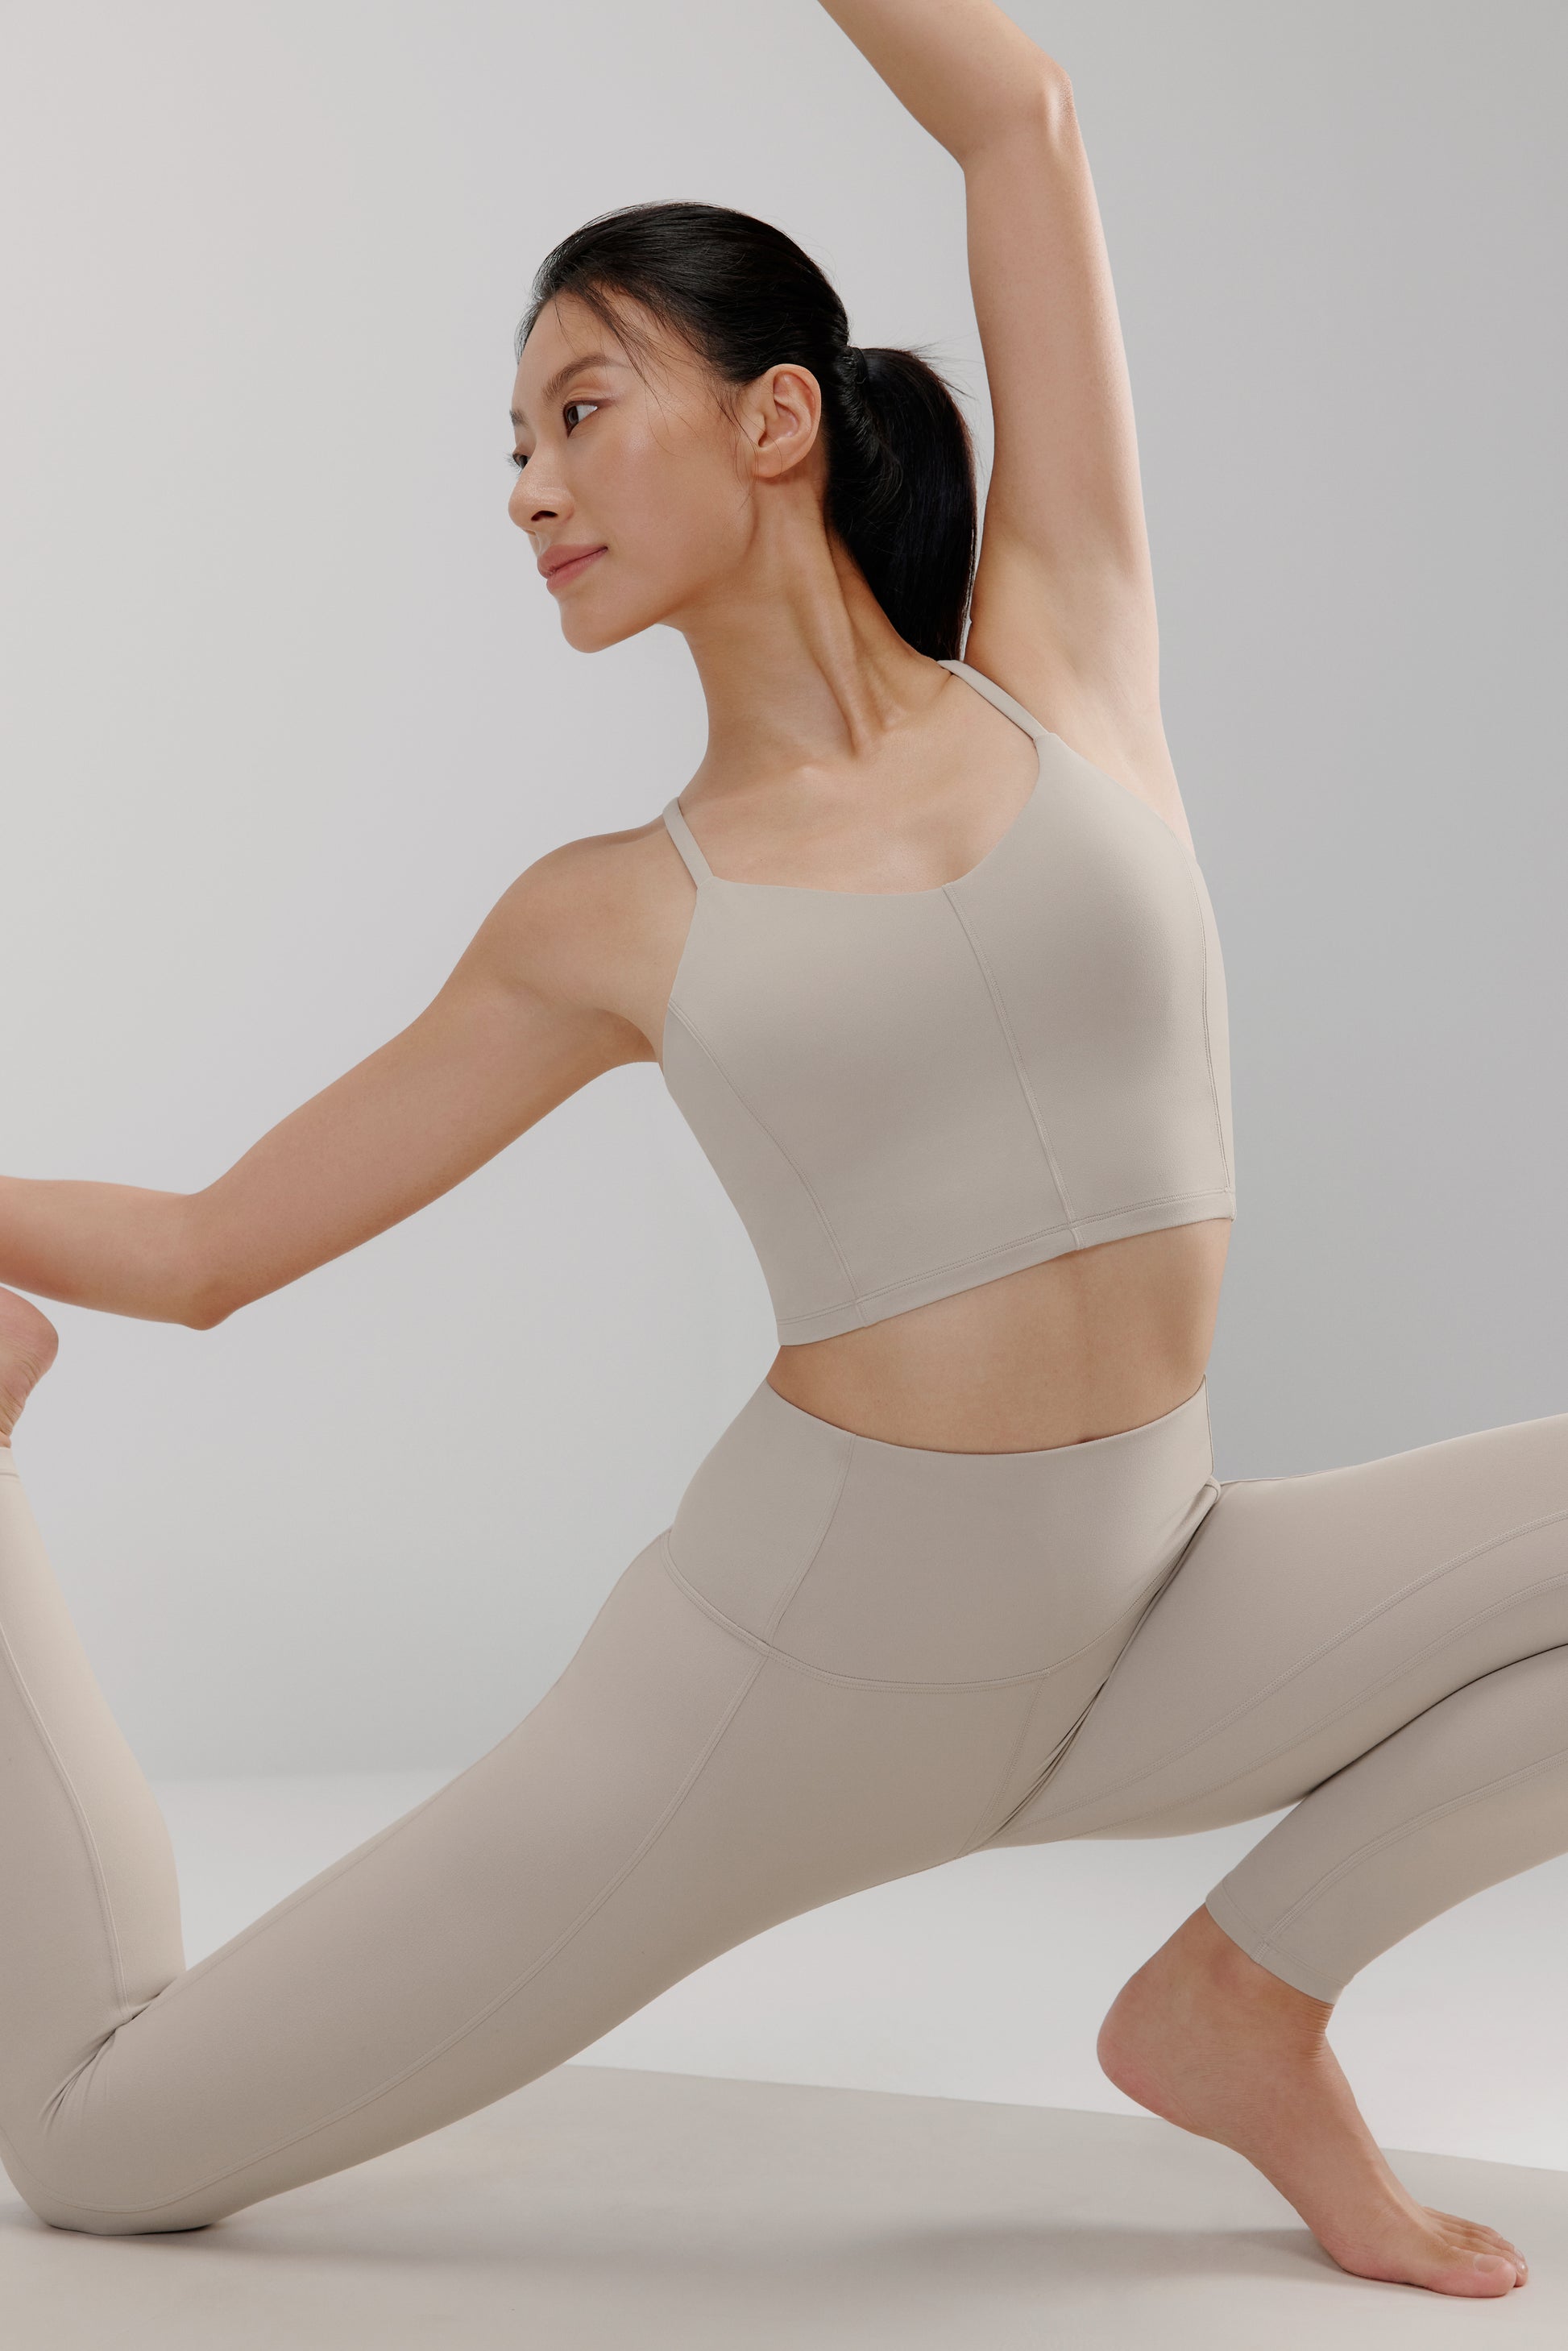 Stretch it out 🧘‍♀️ The perfect blend between fashion and